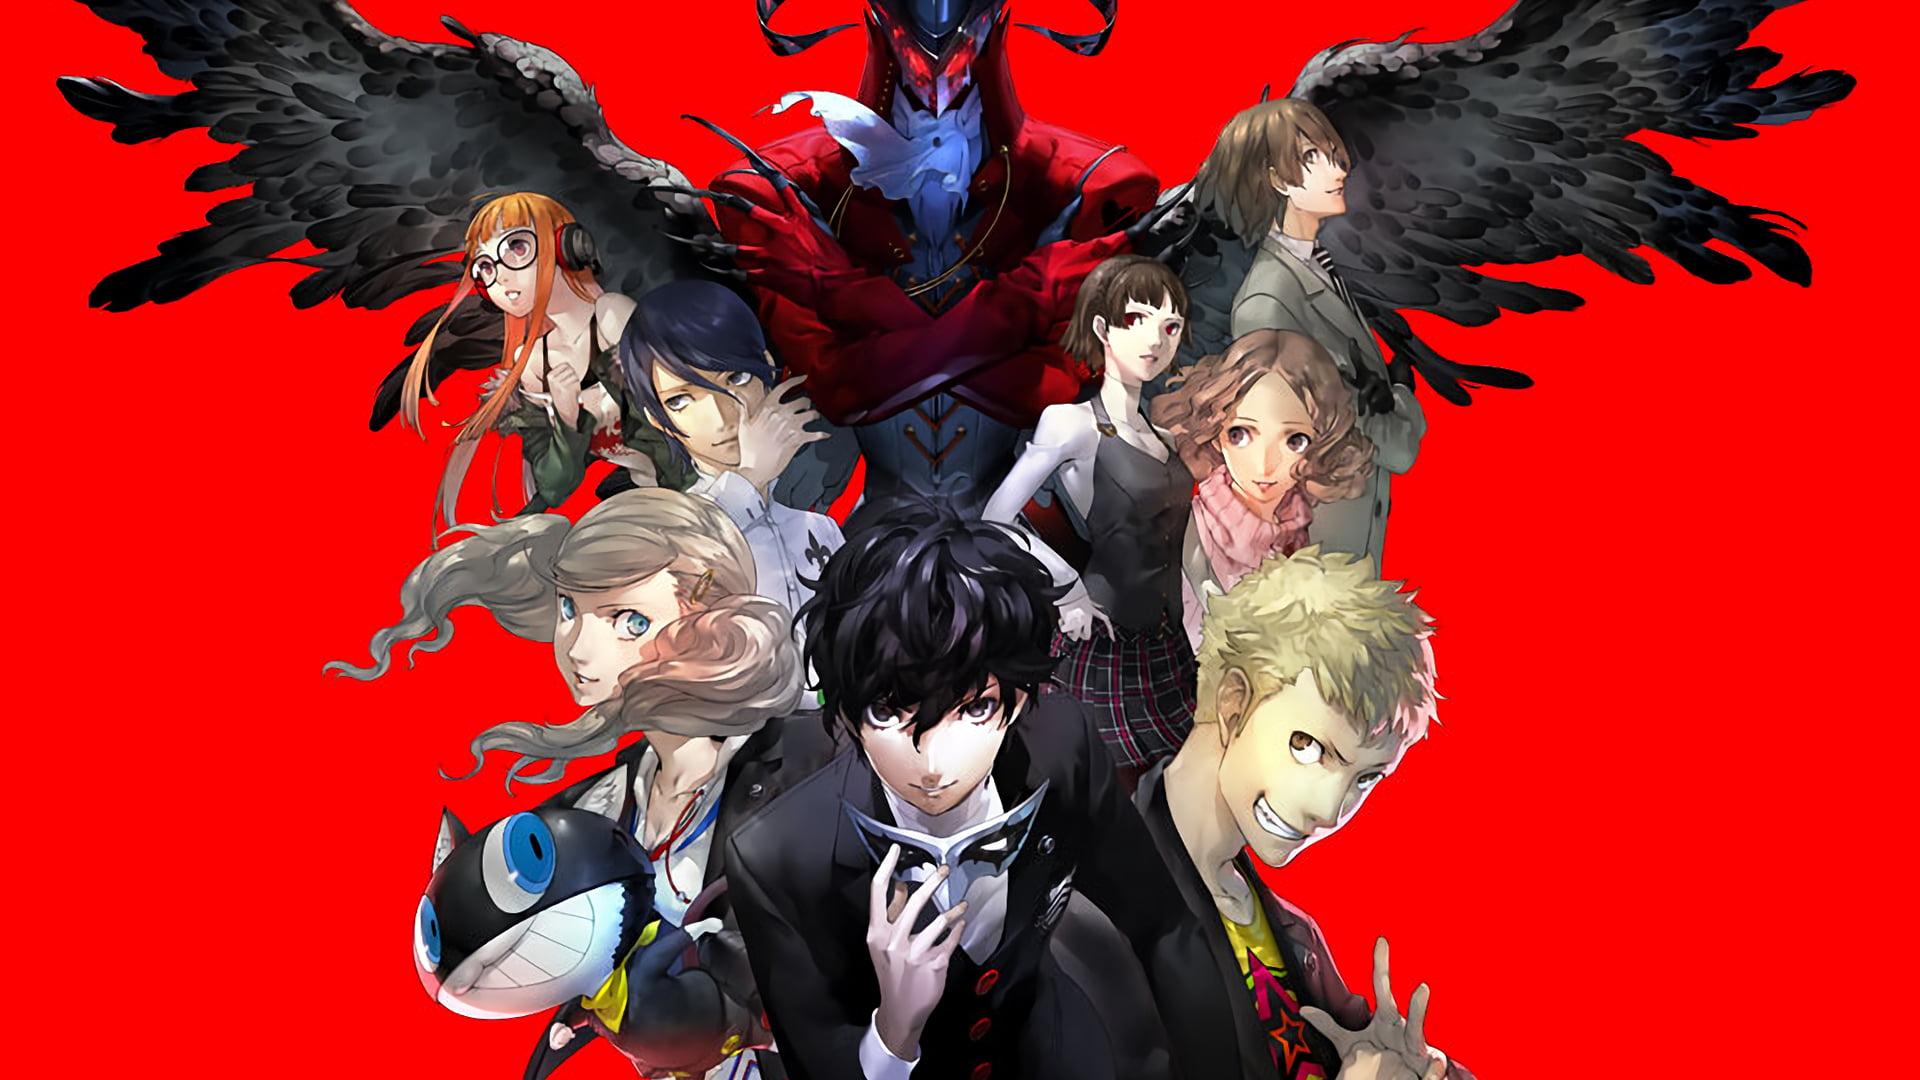 Anime character wallpaper, Persona group of people